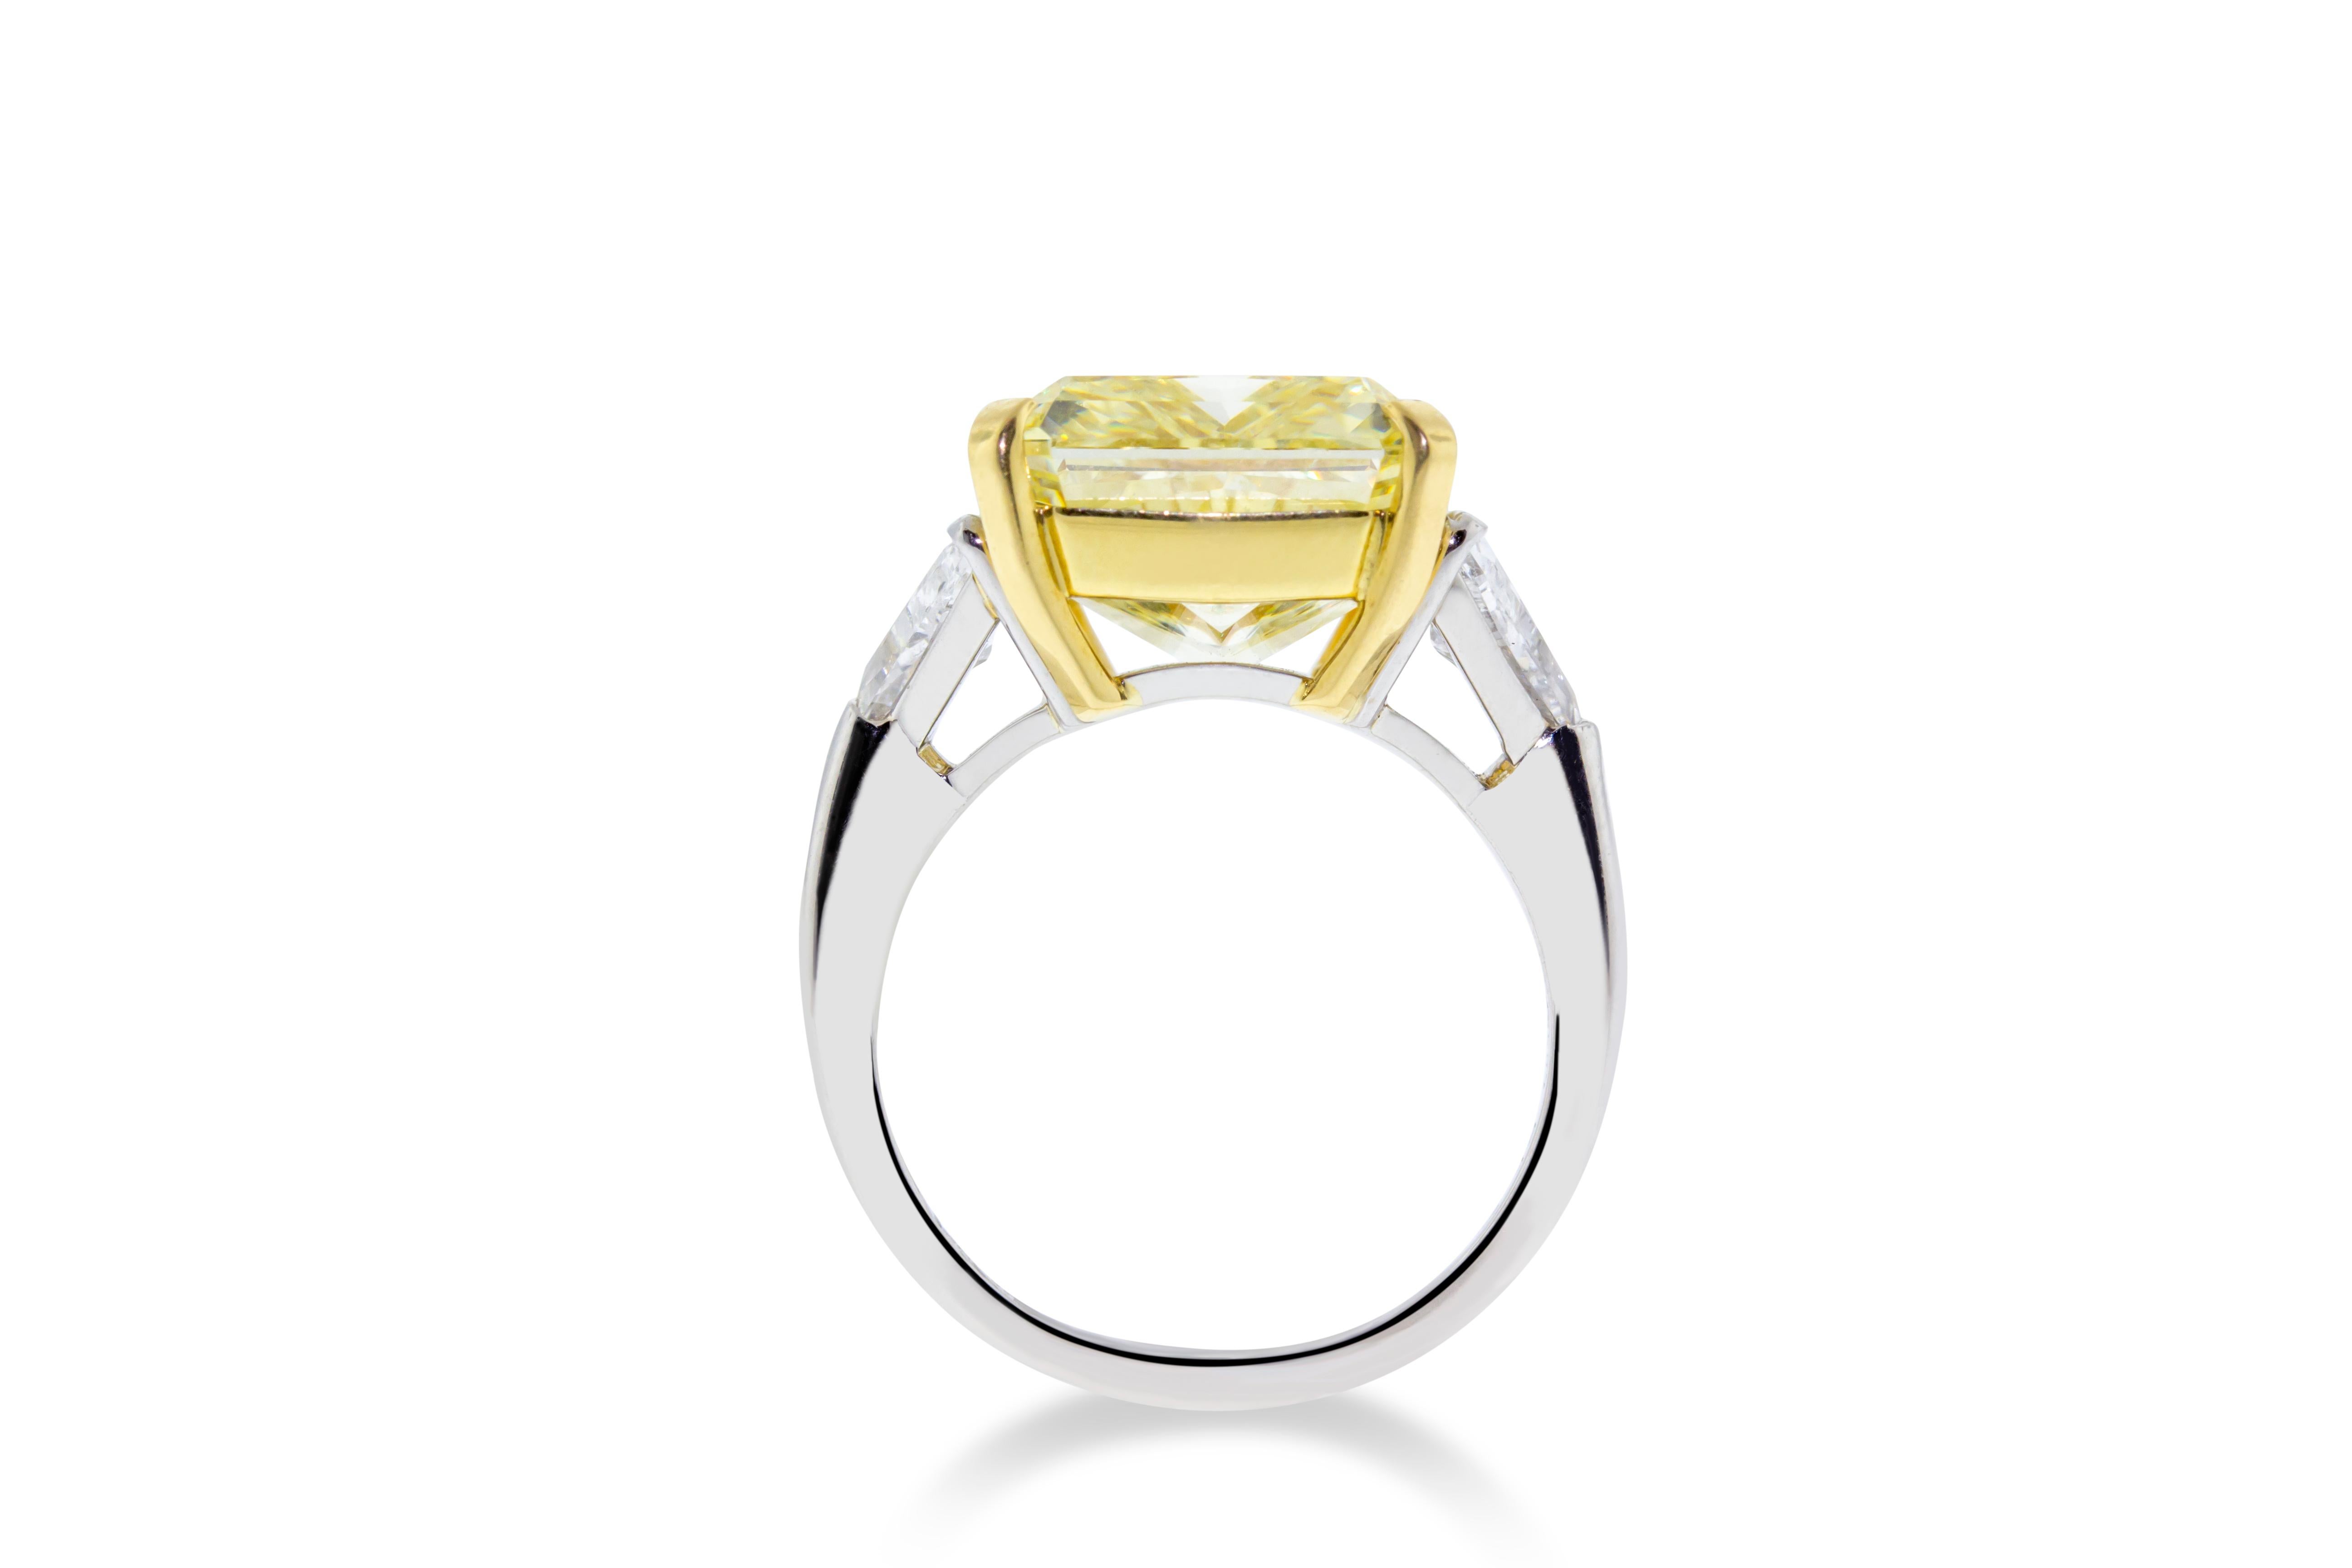 This 10.01 GIA certified VVS2 fancy yellow diamond is set in Platinum and 18K yellow gold. Flanked on either side by two F-G SI trilliant stones with a total weight of 1.21 carats. GIA Certified. Report No. 1186284205. Size 6 3/4. Made in Italy.